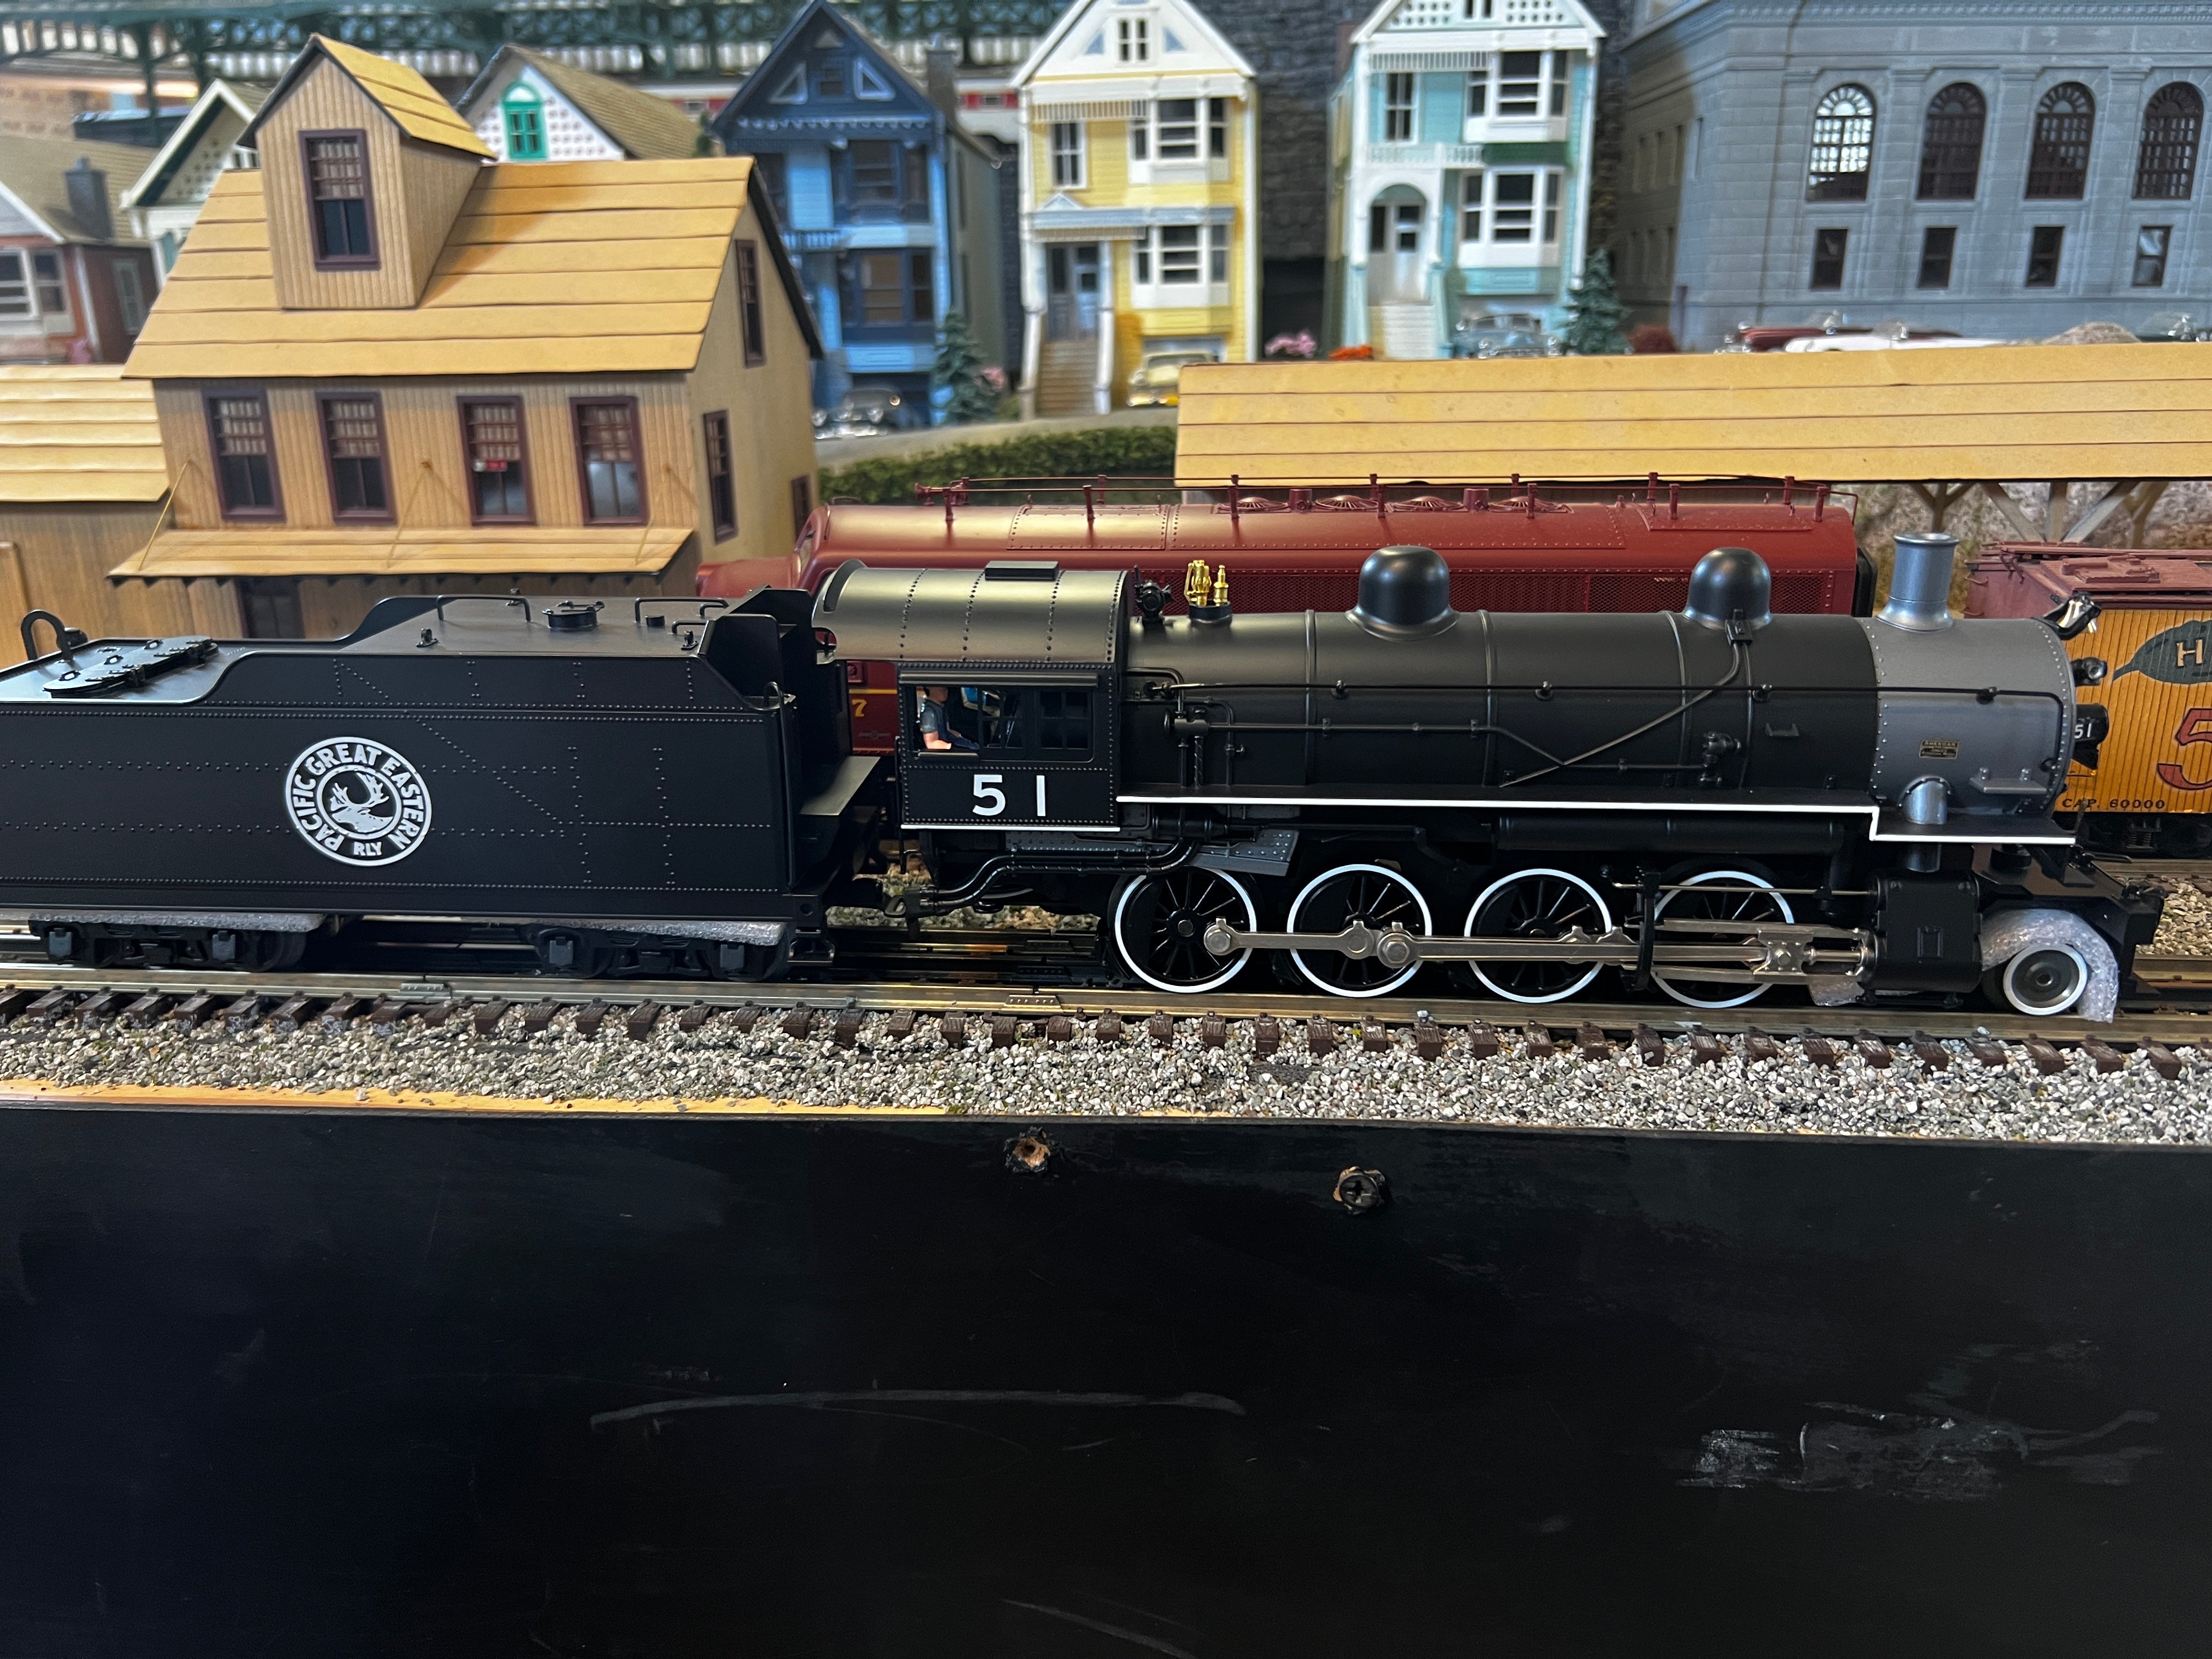 Lionel 2231620 - Legacy 2-8-0 Steam Locomotive "Pacific Great Eastern" #51 - Custom Run for MrMuffin'sTrains